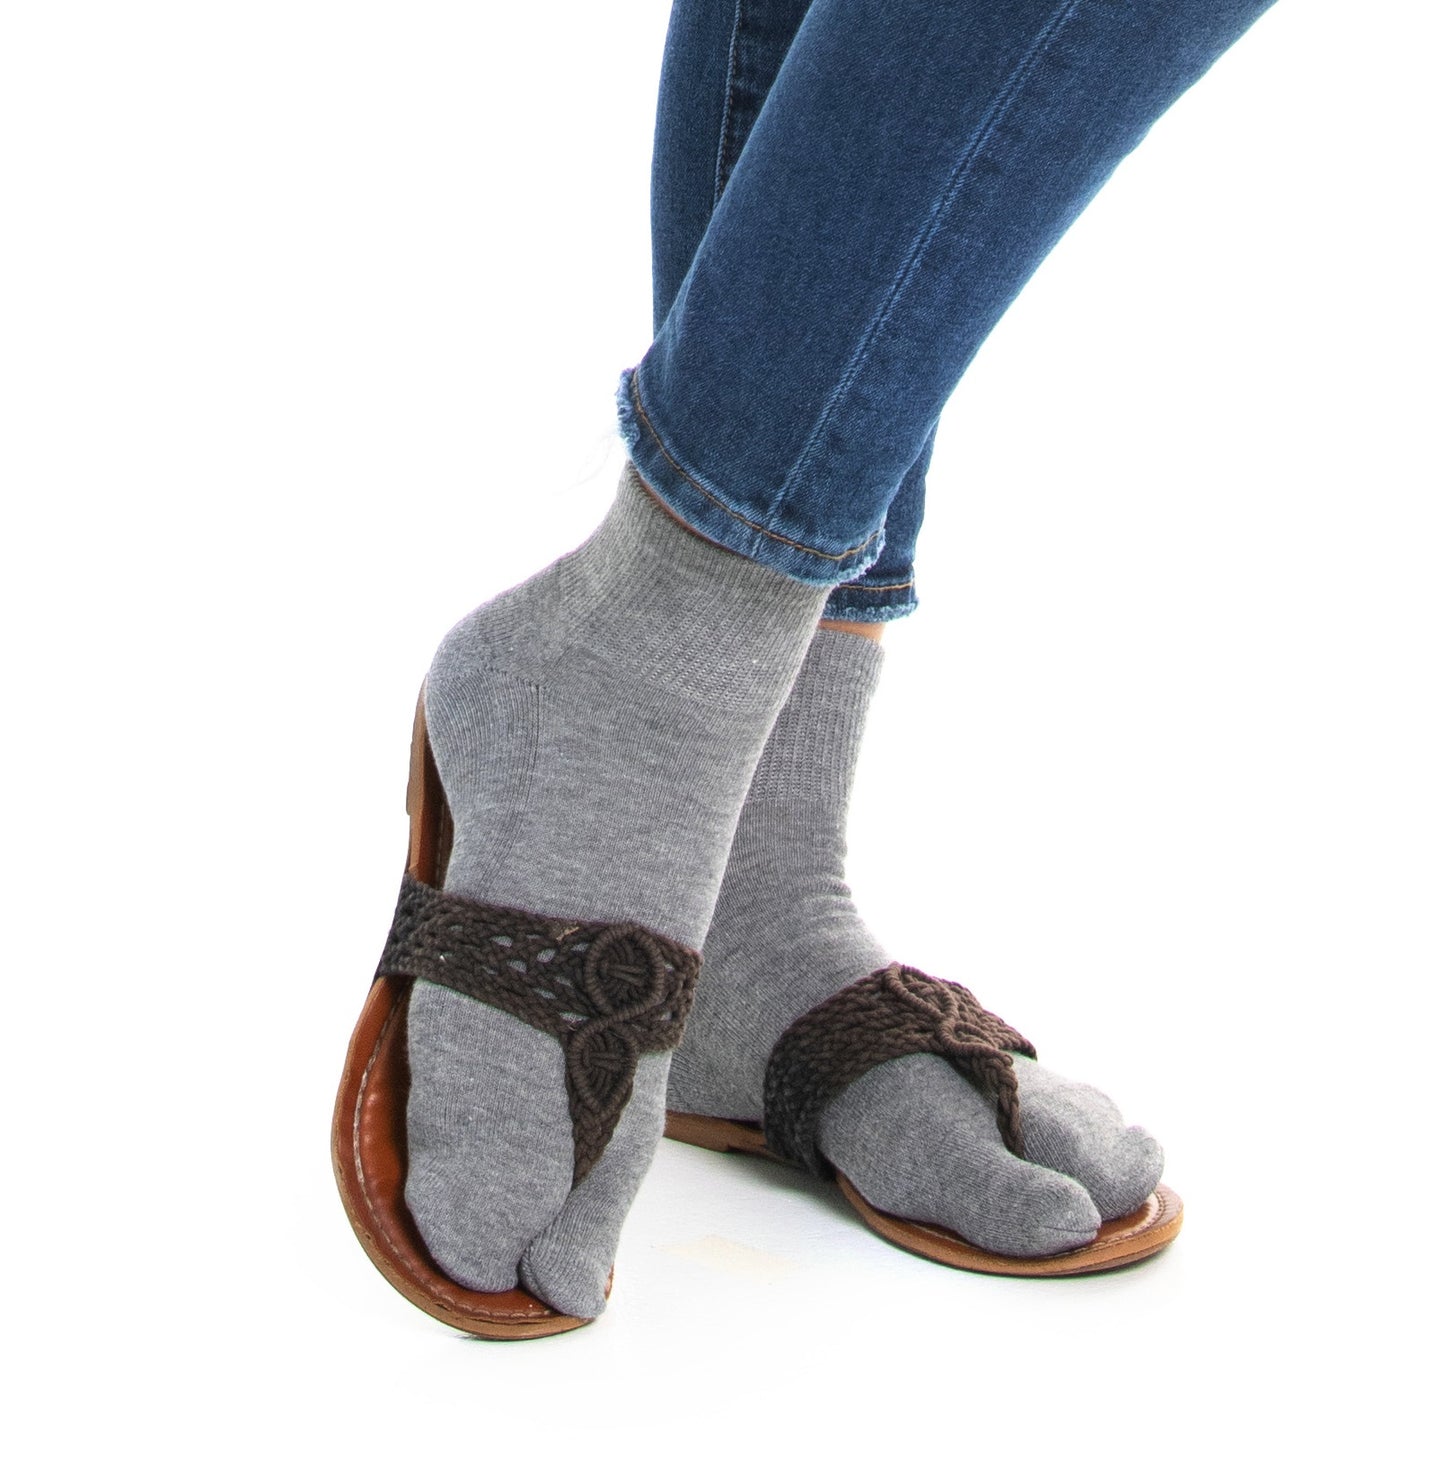 Thicker V-Toe Athletic or Casual Grey Flip-Flop Tabi Socks Cotton Blend Comfortable Stylish - Ankle Socks